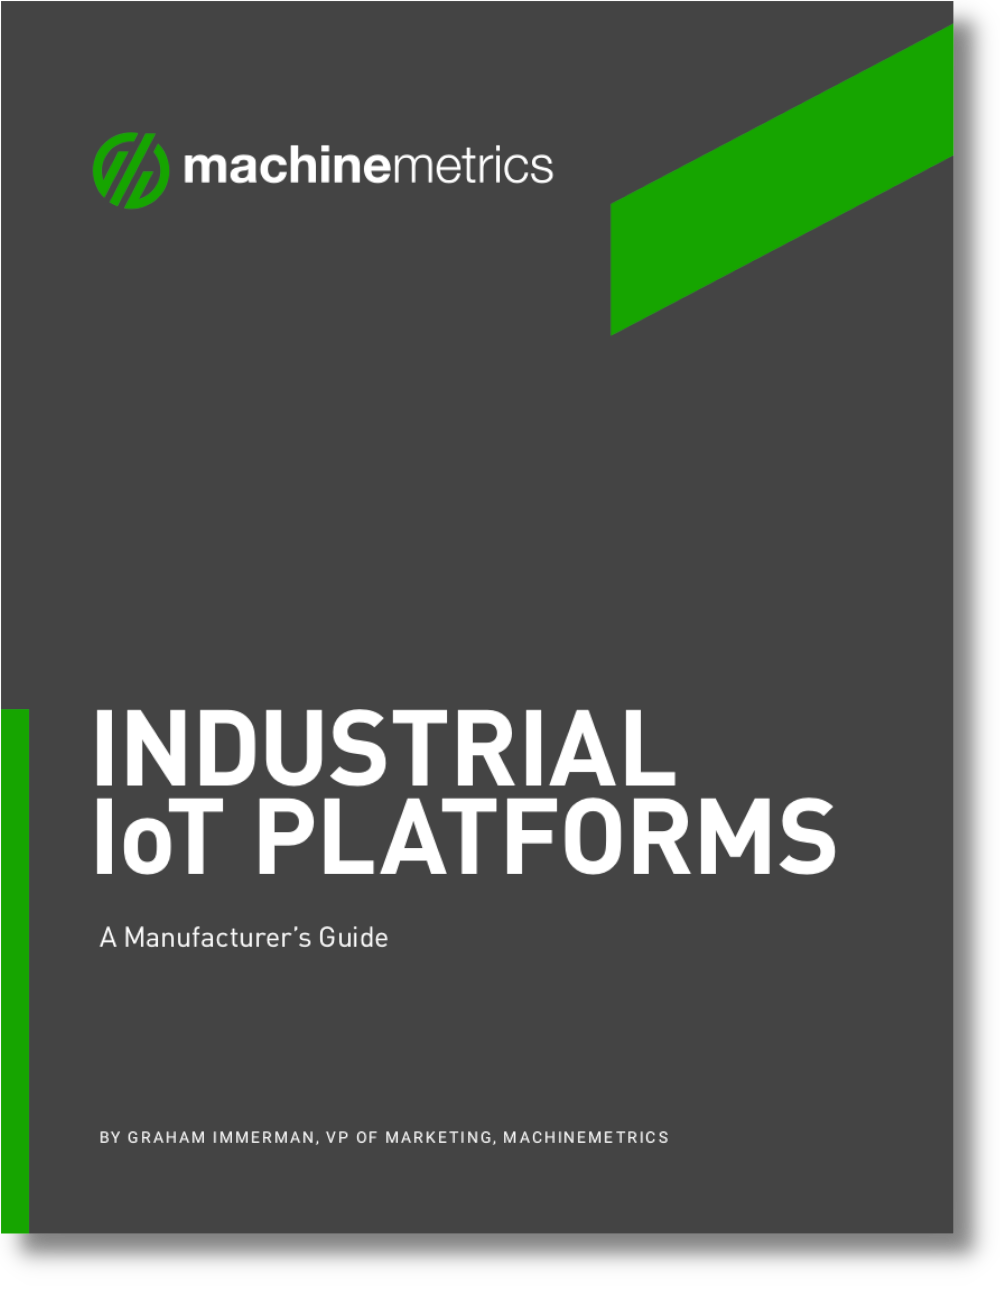 A Manufacturer's Guide to Industrial IoT Platforms